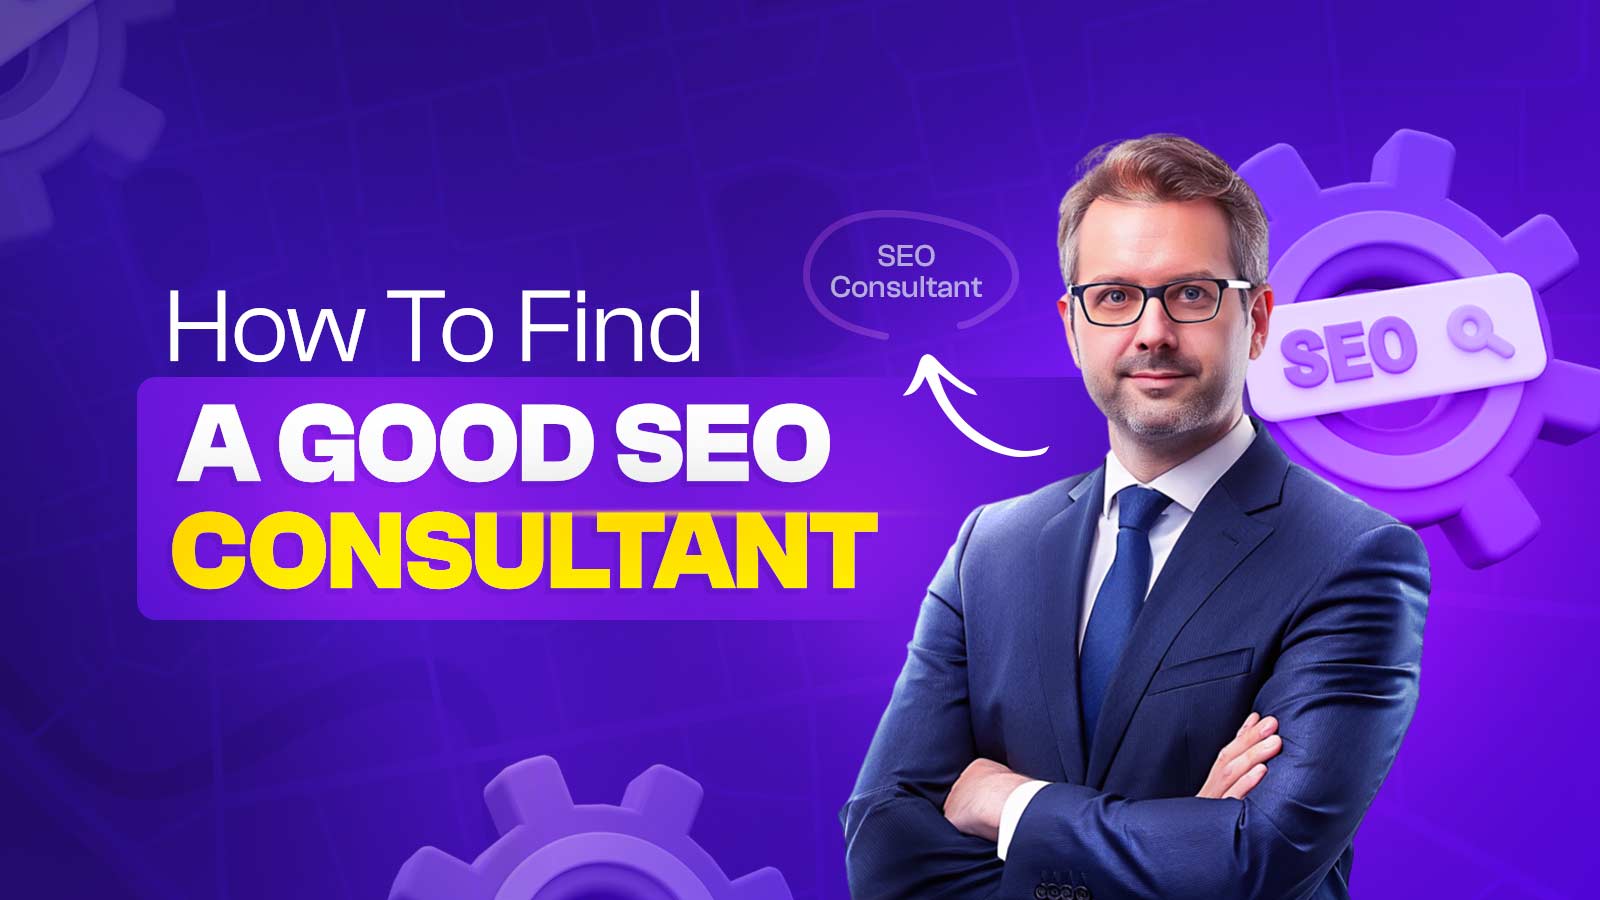 What To Look & How To Find A Good SEO Consultant? 